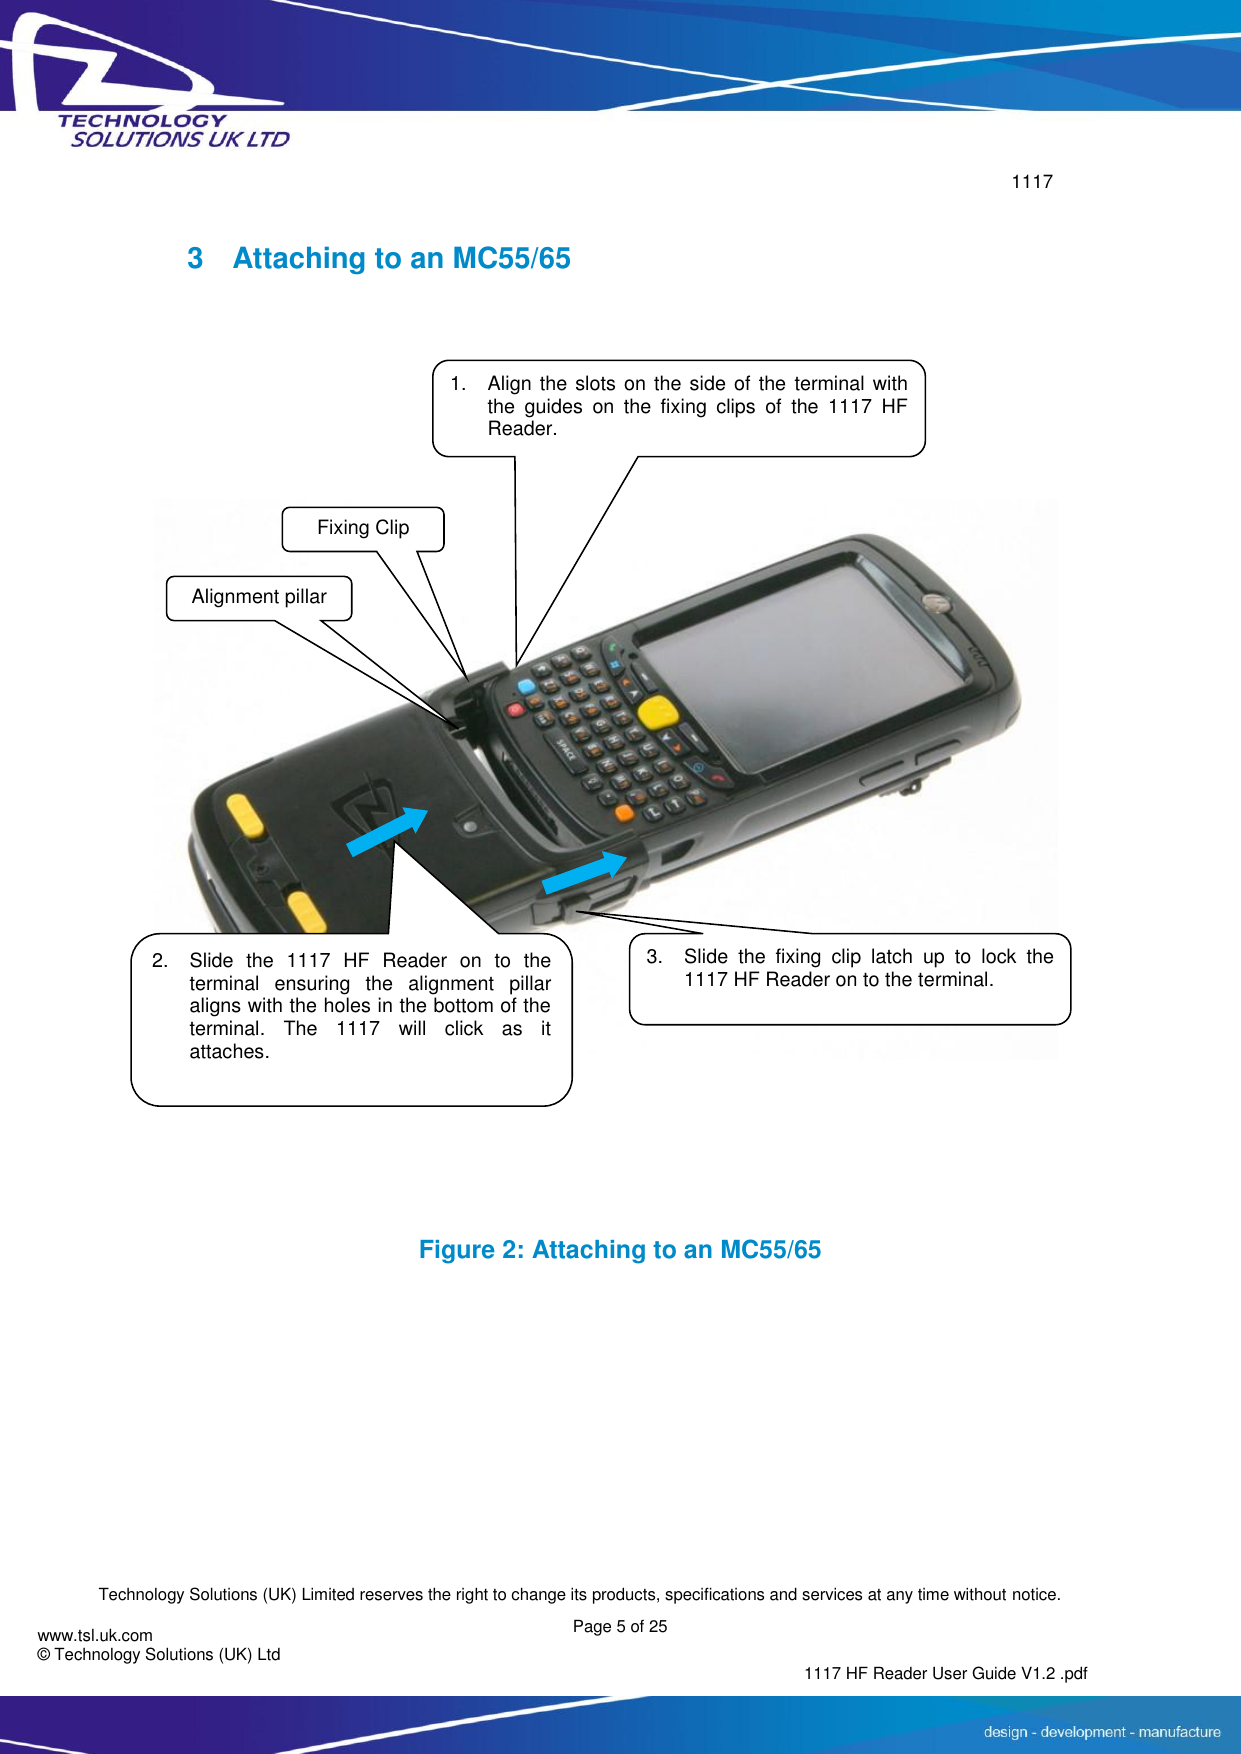        1117  Technology Solutions (UK) Limited reserves the right to change its products, specifications and services at any time without notice. Page 5 of 25 1117 HF Reader User Guide V1.2 .pdf www.tsl.uk.com © Technology Solutions (UK) Ltd   3  Attaching to an MC55/65    Figure 2: Attaching to an MC55/65 Fixing Clip 1. Align the slots on the side of the  terminal with the  guides  on  the  fixing  clips  of  the  1117  HF Reader. 2. Slide  the  1117  HF  Reader  on  to  the terminal  ensuring  the  alignment  pillar aligns with the holes in the bottom of the terminal.  The  1117  will  click  as  it attaches.  Alignment pillar 3. Slide  the  fixing  clip  latch  up  to  lock  the 1117 HF Reader on to the terminal.  